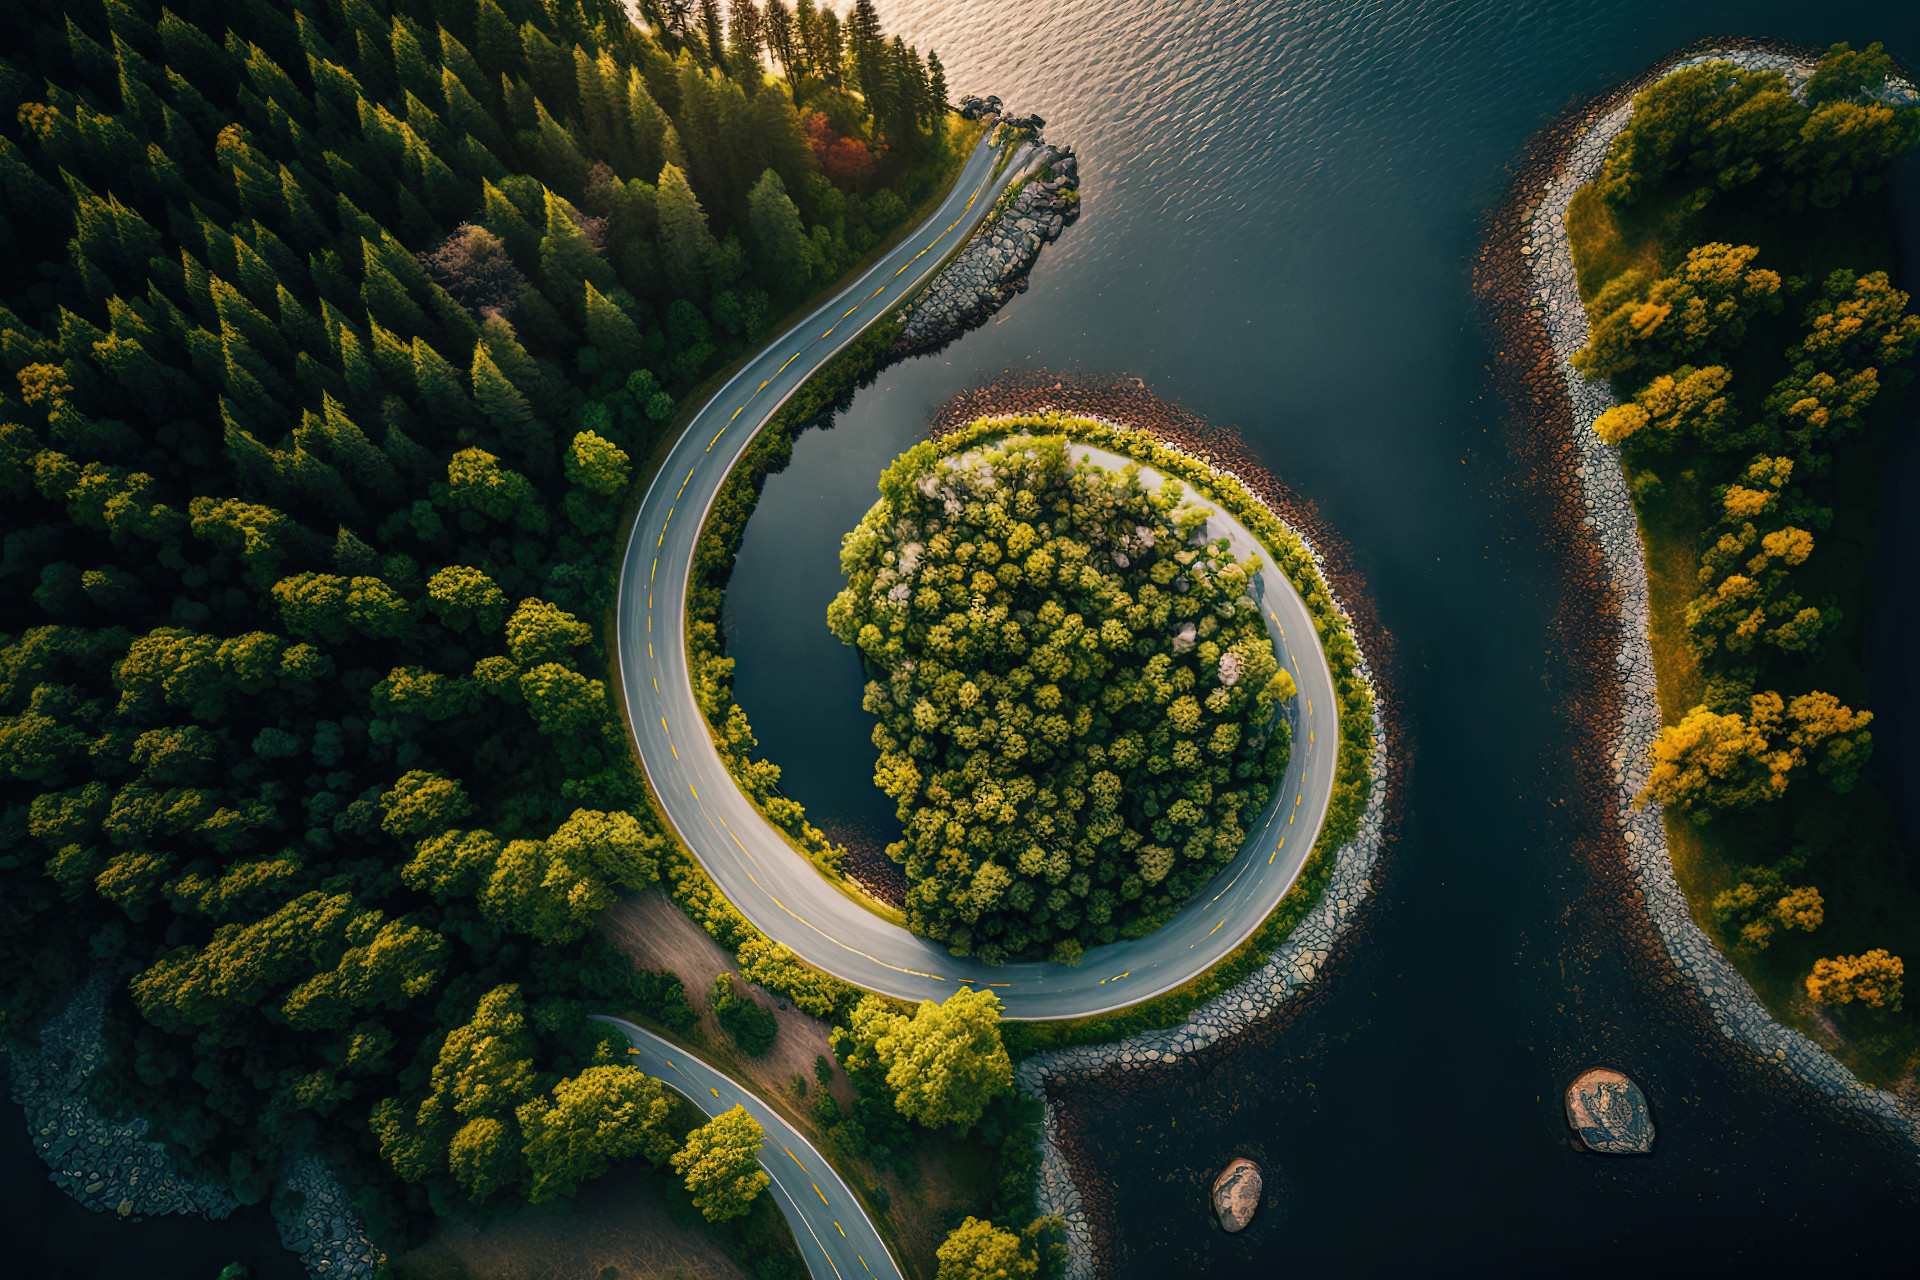 Bird's eye view of a curvy road next to water.